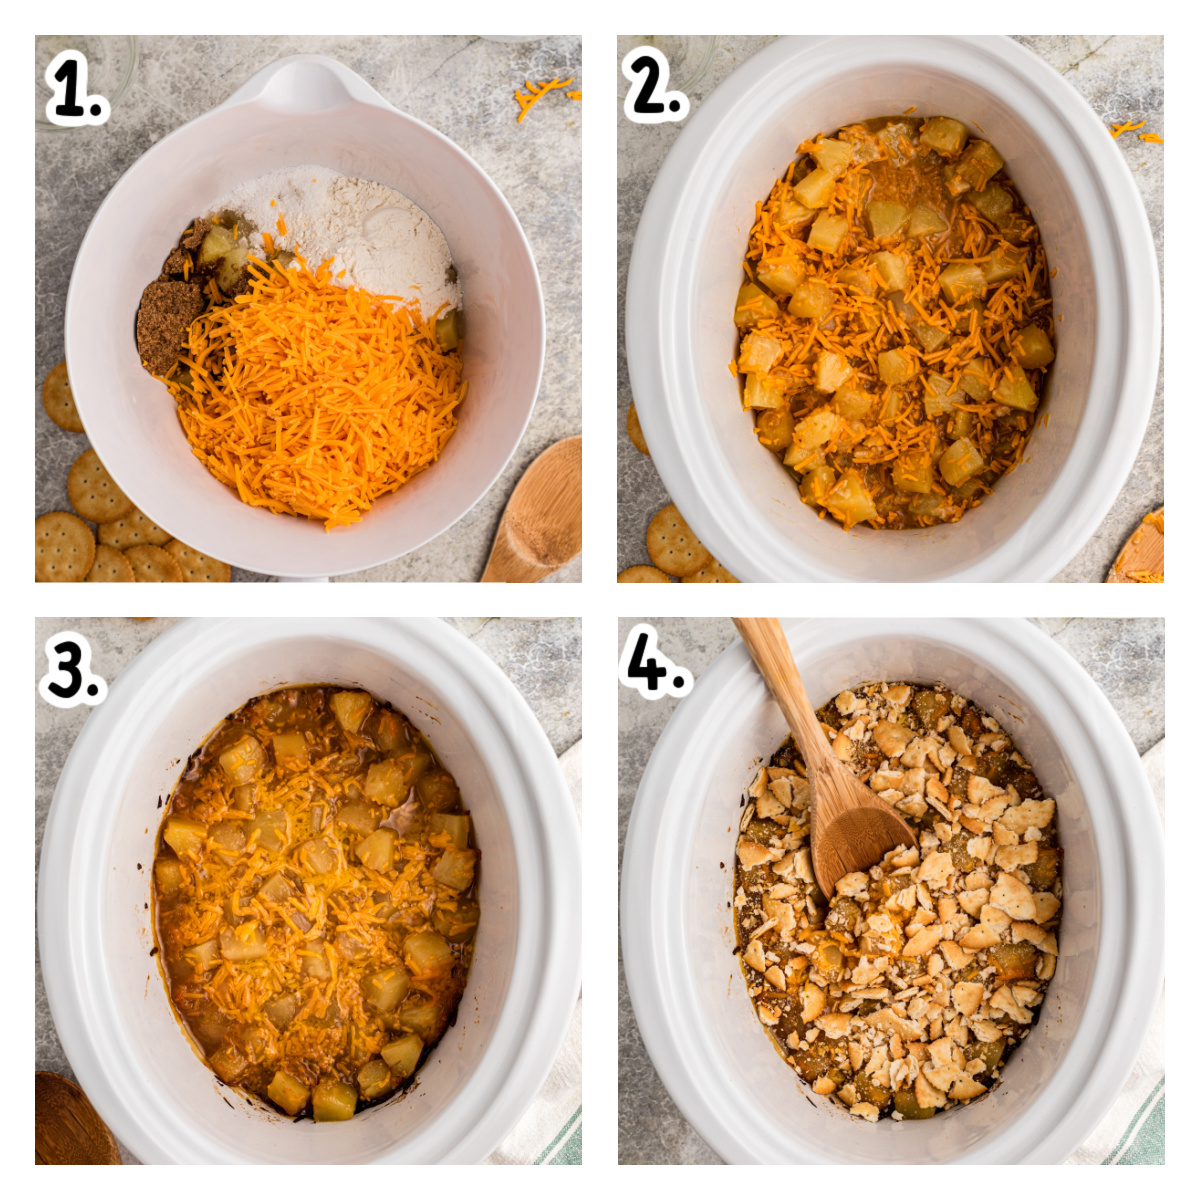 Four images showing how to make pineapple casserole.